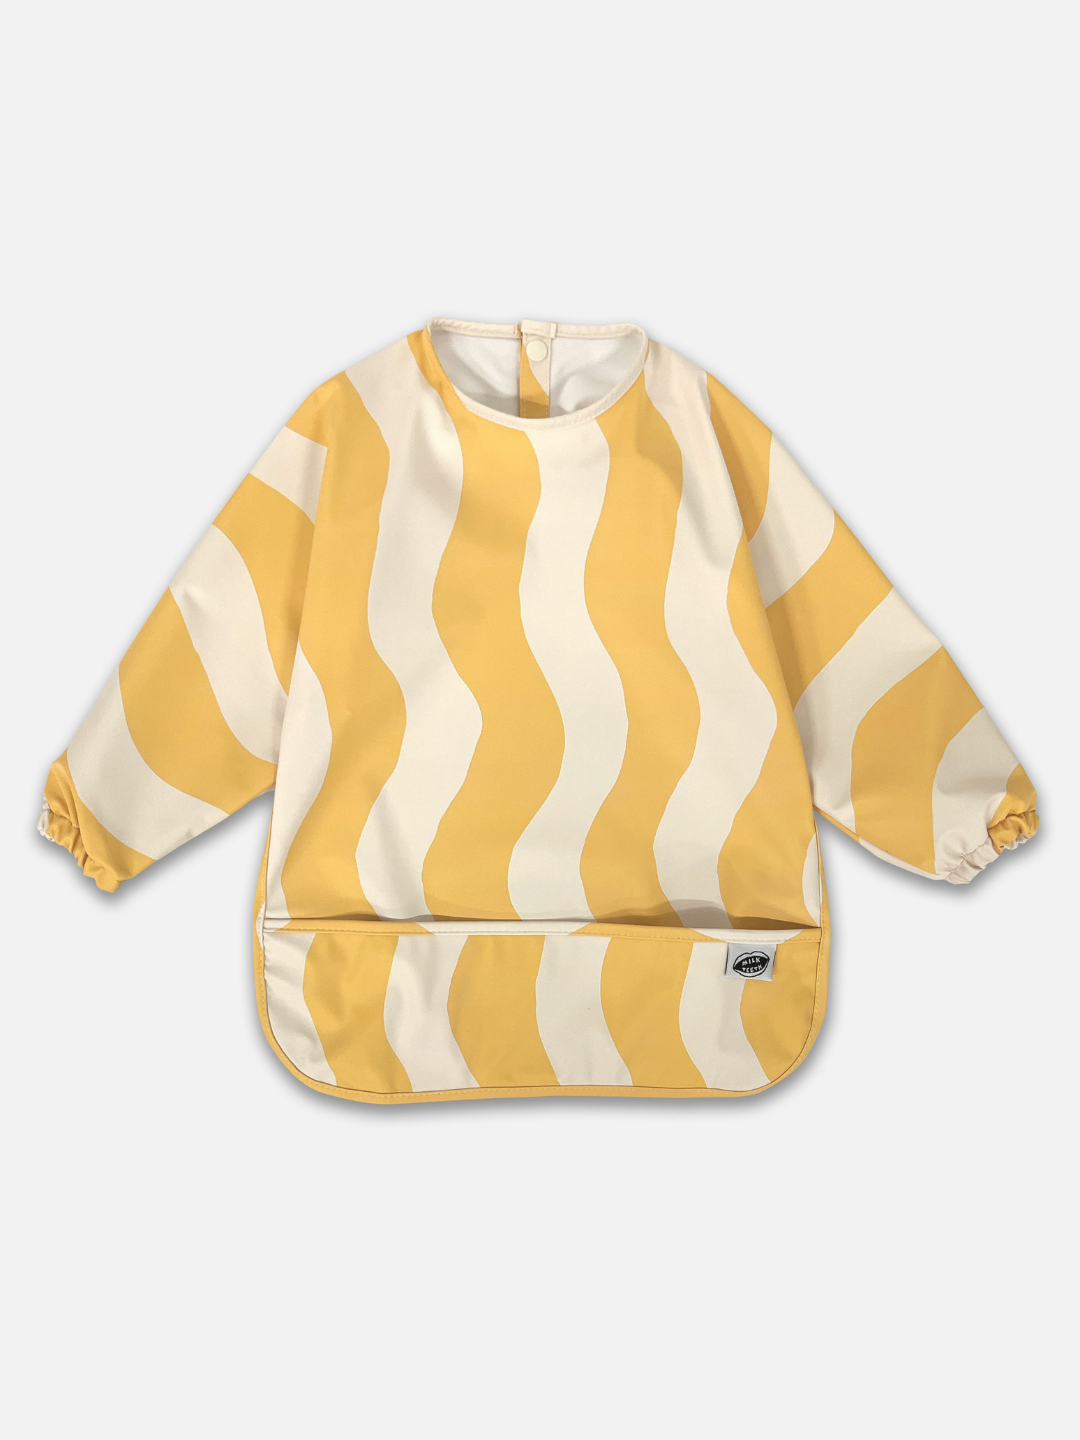 A front view  of the long sleeve yellow and white wavy bib and a front pocket.